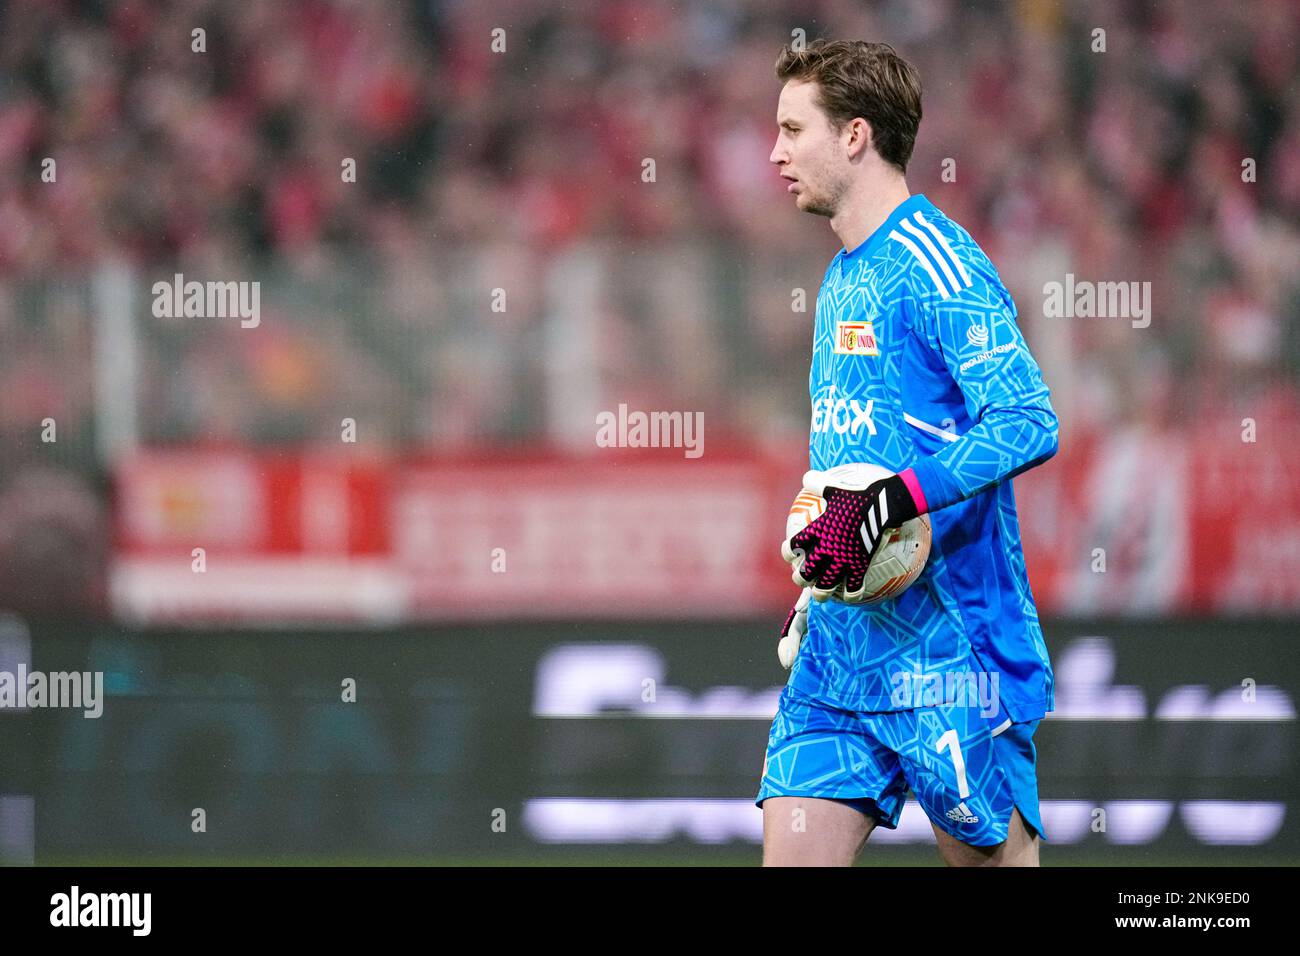 BERLIN, GERMANY - FEBRUARY 23: goalkeeper Frederik Ronnow of FC Union Berlin during the Europa League Play-off, 2nd leg match between FC Union Berlin and Ajax at Stadion An der alten Forsterei on February 23, 2023 in Berlin, Germany (Photo by Patrick Goosen/Orange Pictures) Stock Photo